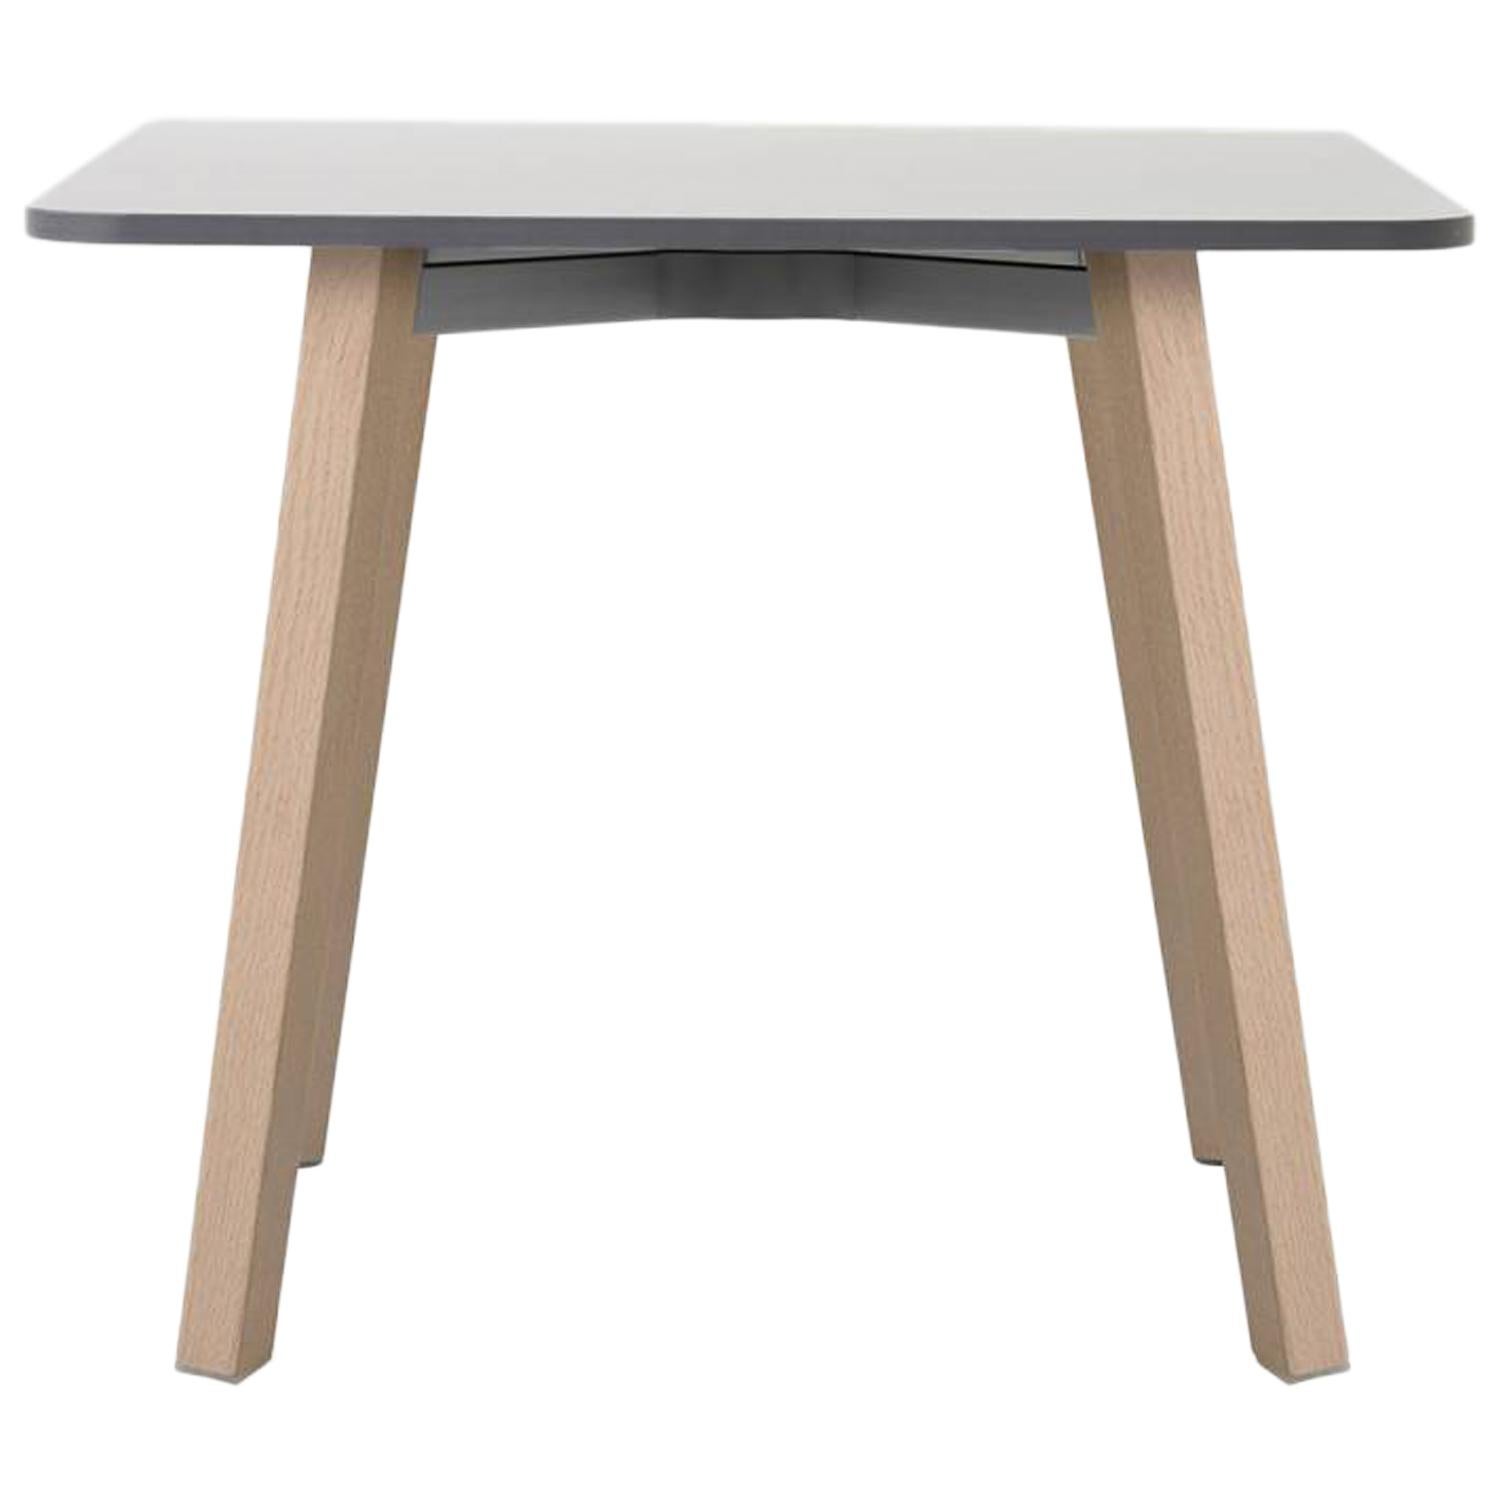 Emeco Su Low Table in Wood with White Laminate Top by Nendo